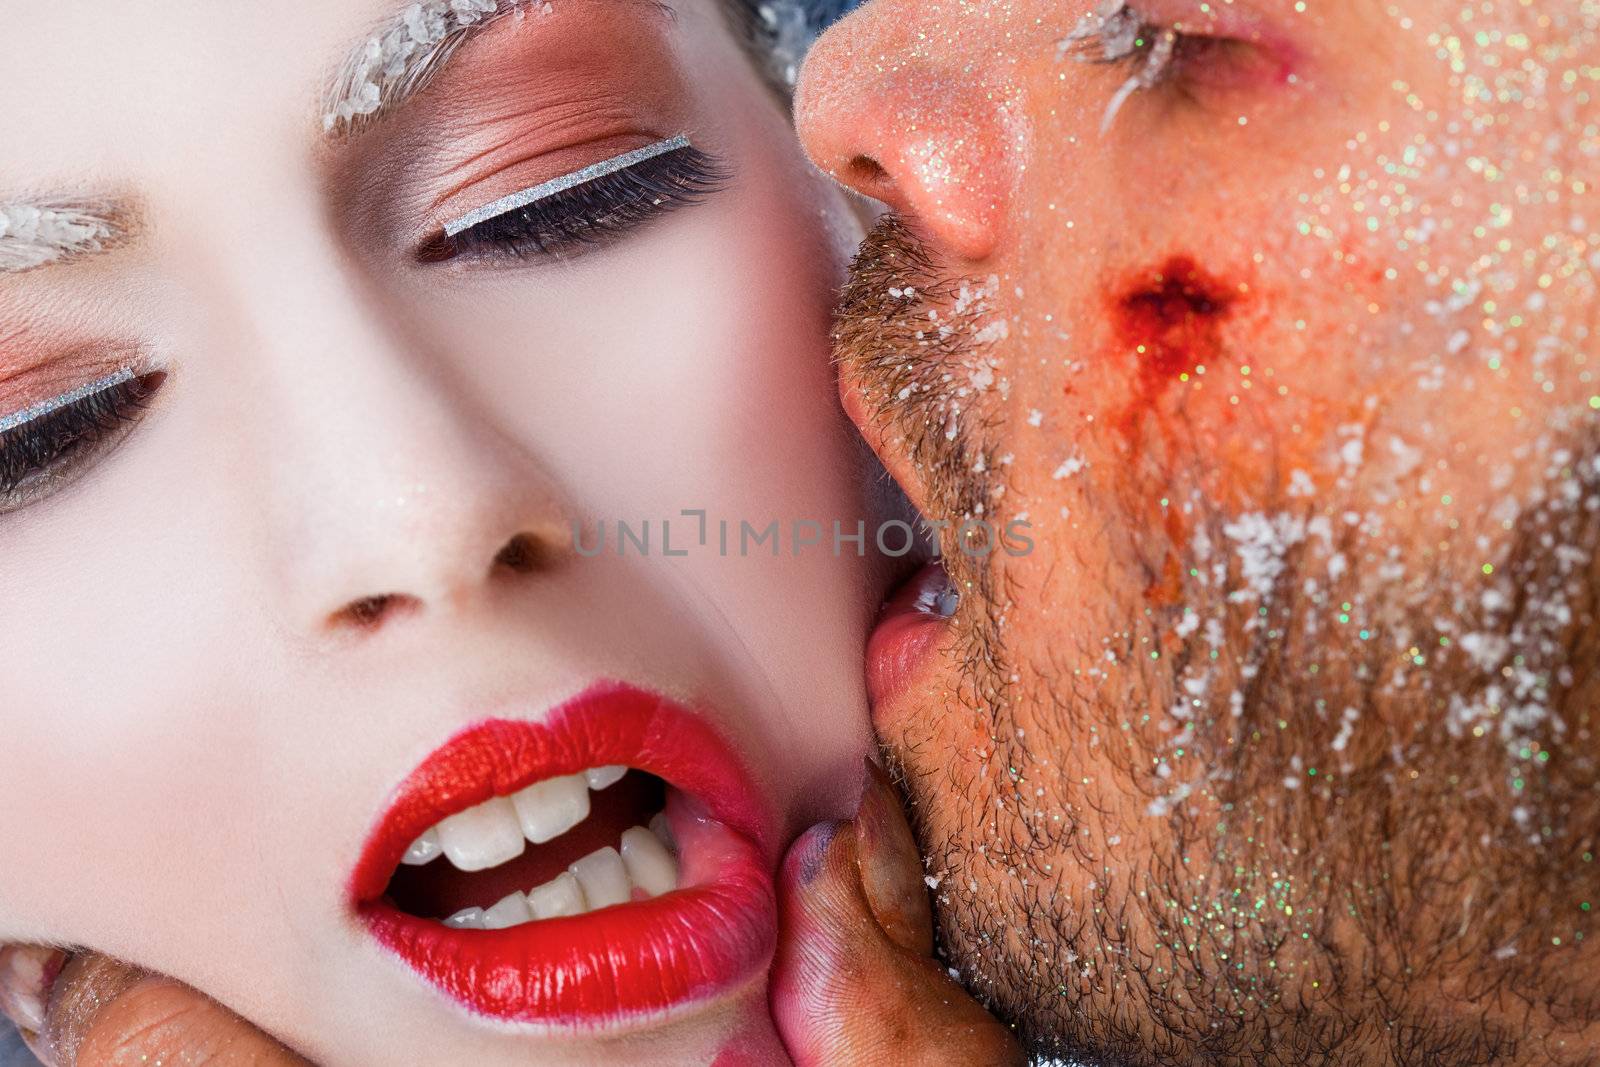 Close-up of wounded male face kissing woman on cheek, both faces covered with frost